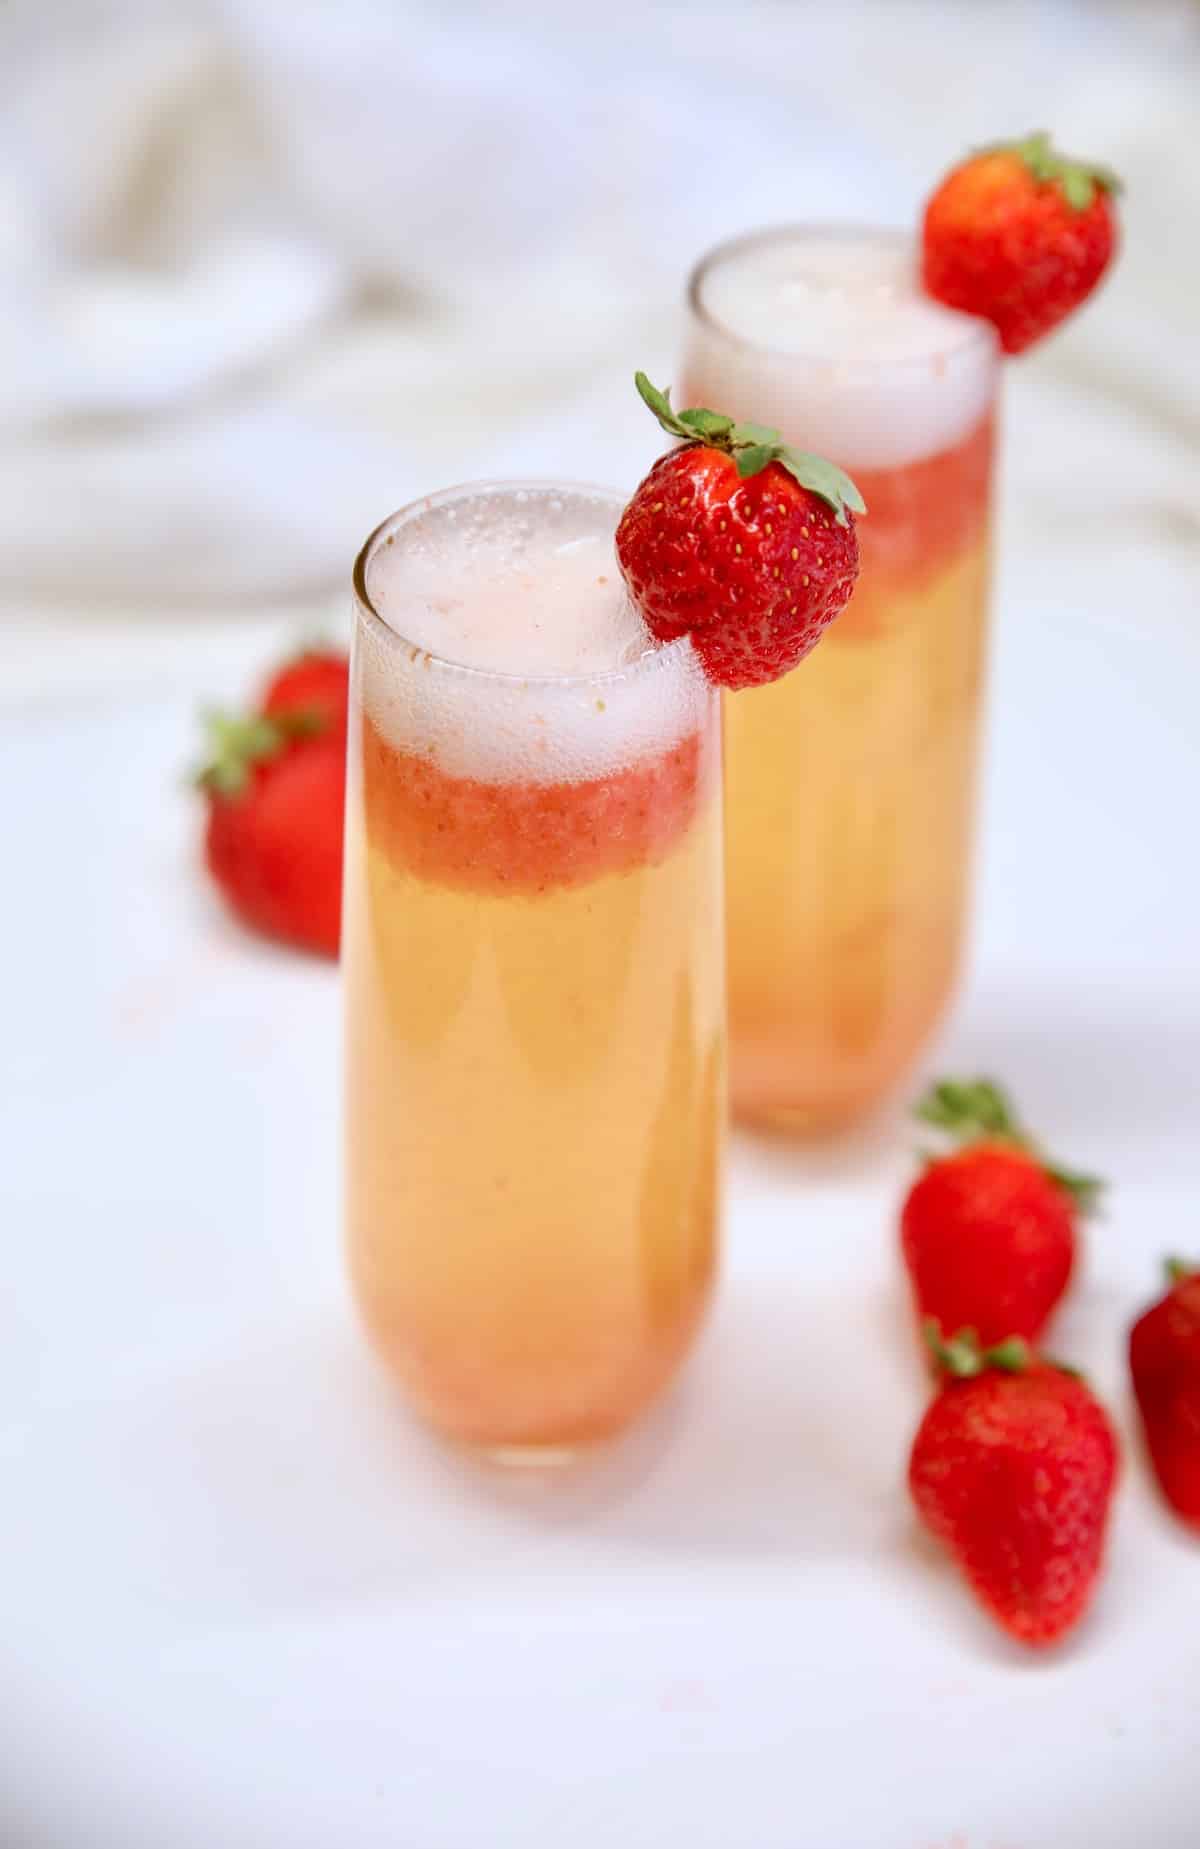 2 strawberry mimosa cocktails with strawberry garnish.